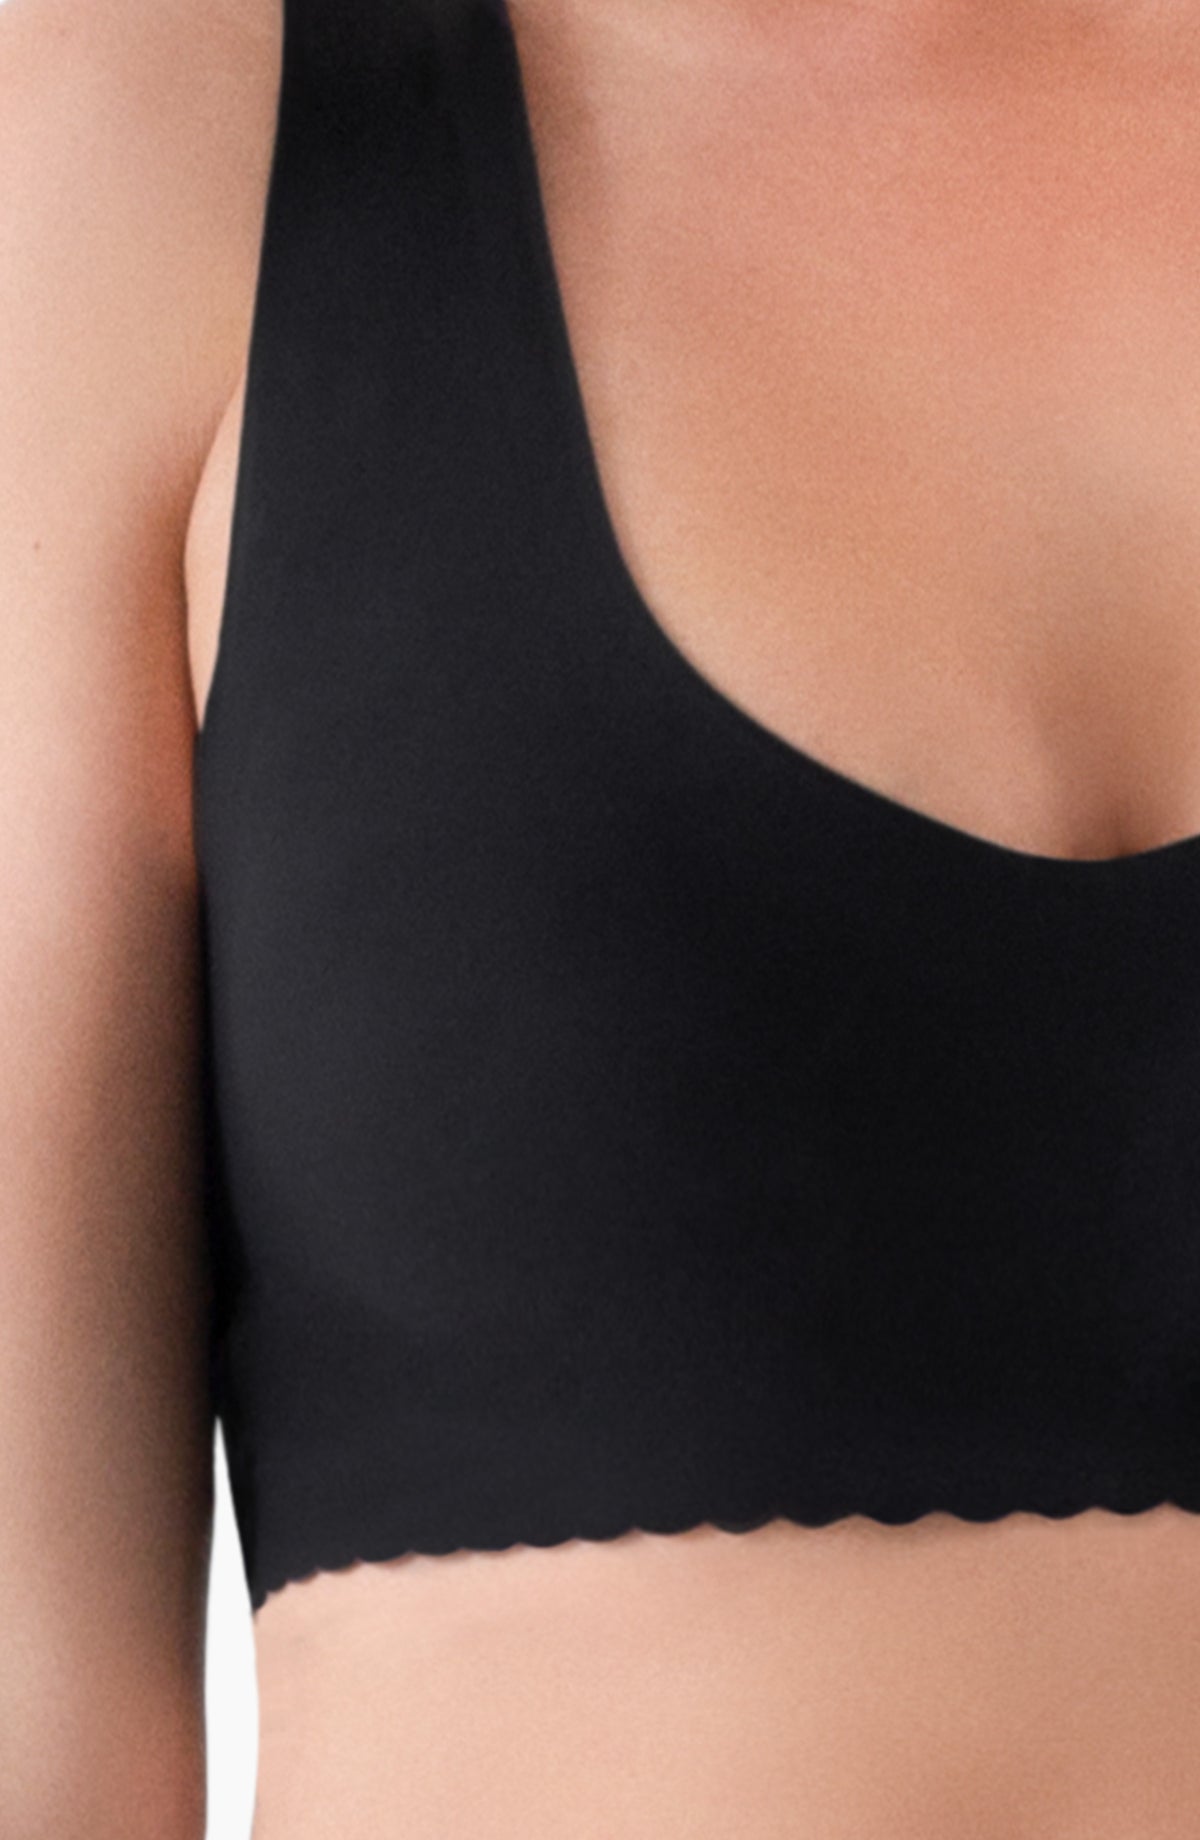 I'm obsessed with this $15 sports bra from : Along Fit crop top bra  review